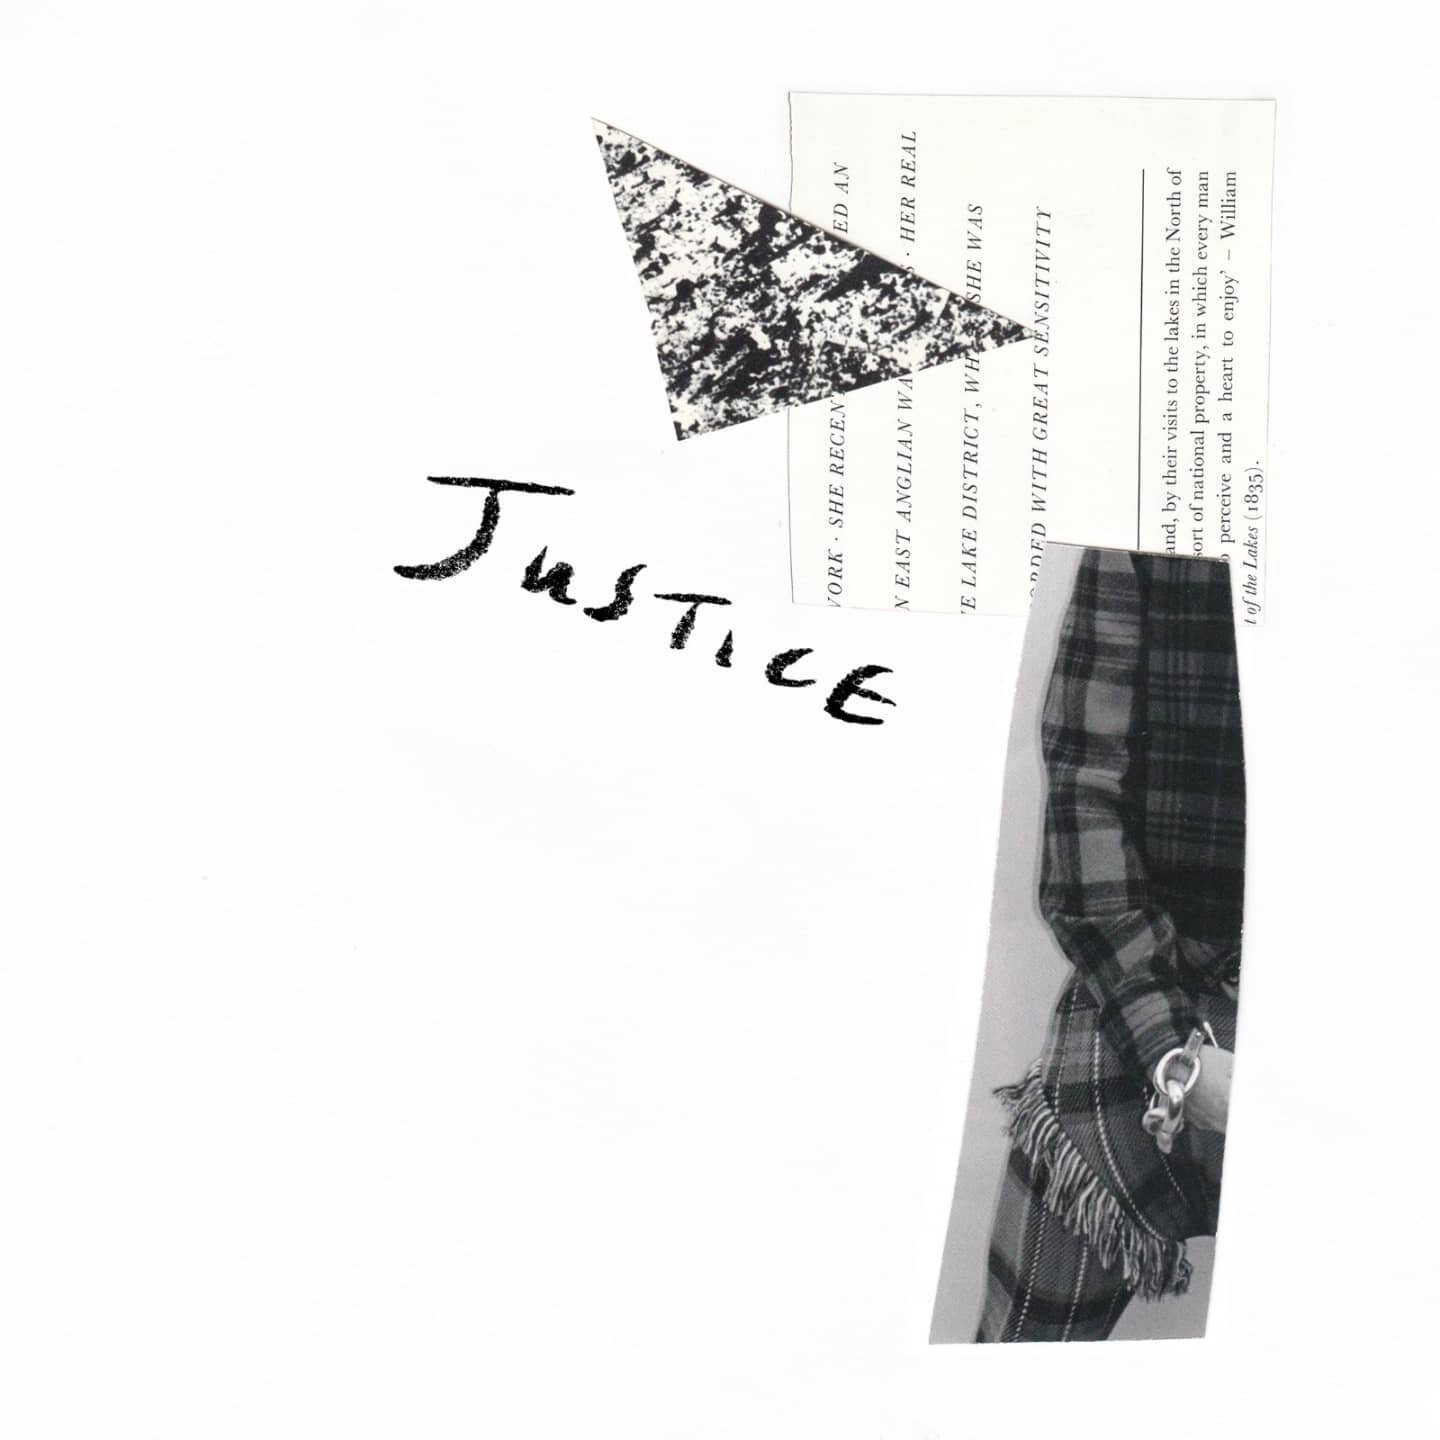 Day 12! This time it's JUSTICE! Keywords: EQUALITY, VERDICT, BALANCE. 
.
.
.
#inktober #ink #october #collage #tarot #tarotcards #astrology #witches #witchcraft #magick #witchesofinstagram  #design #drawing #art #illustration #illustratorsoninstagram